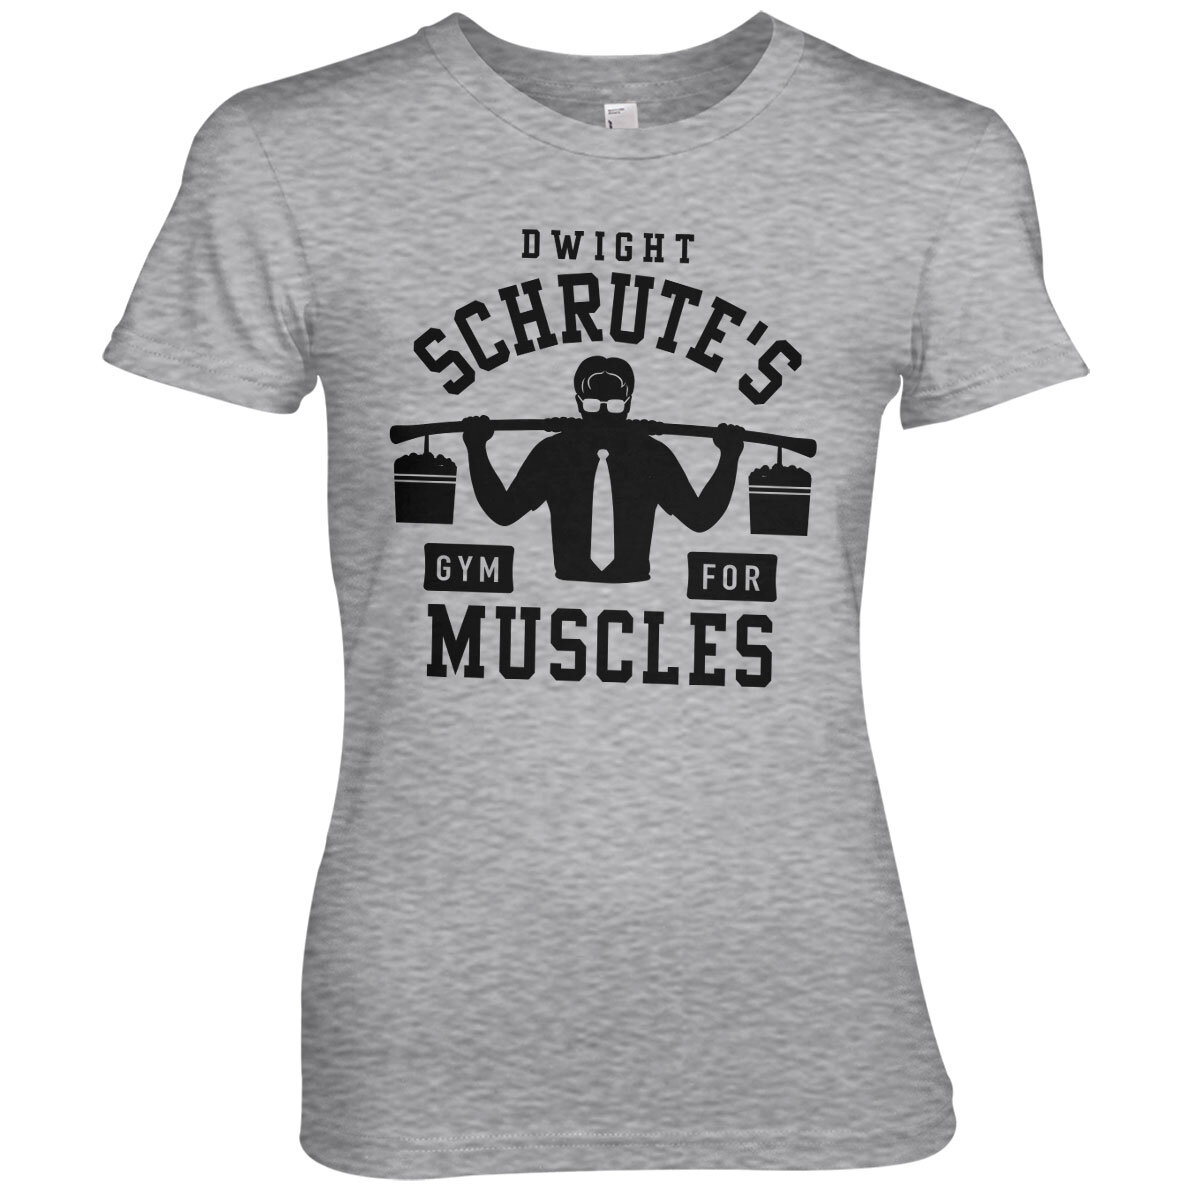 Dwight Schrute's Gym Girly Tee